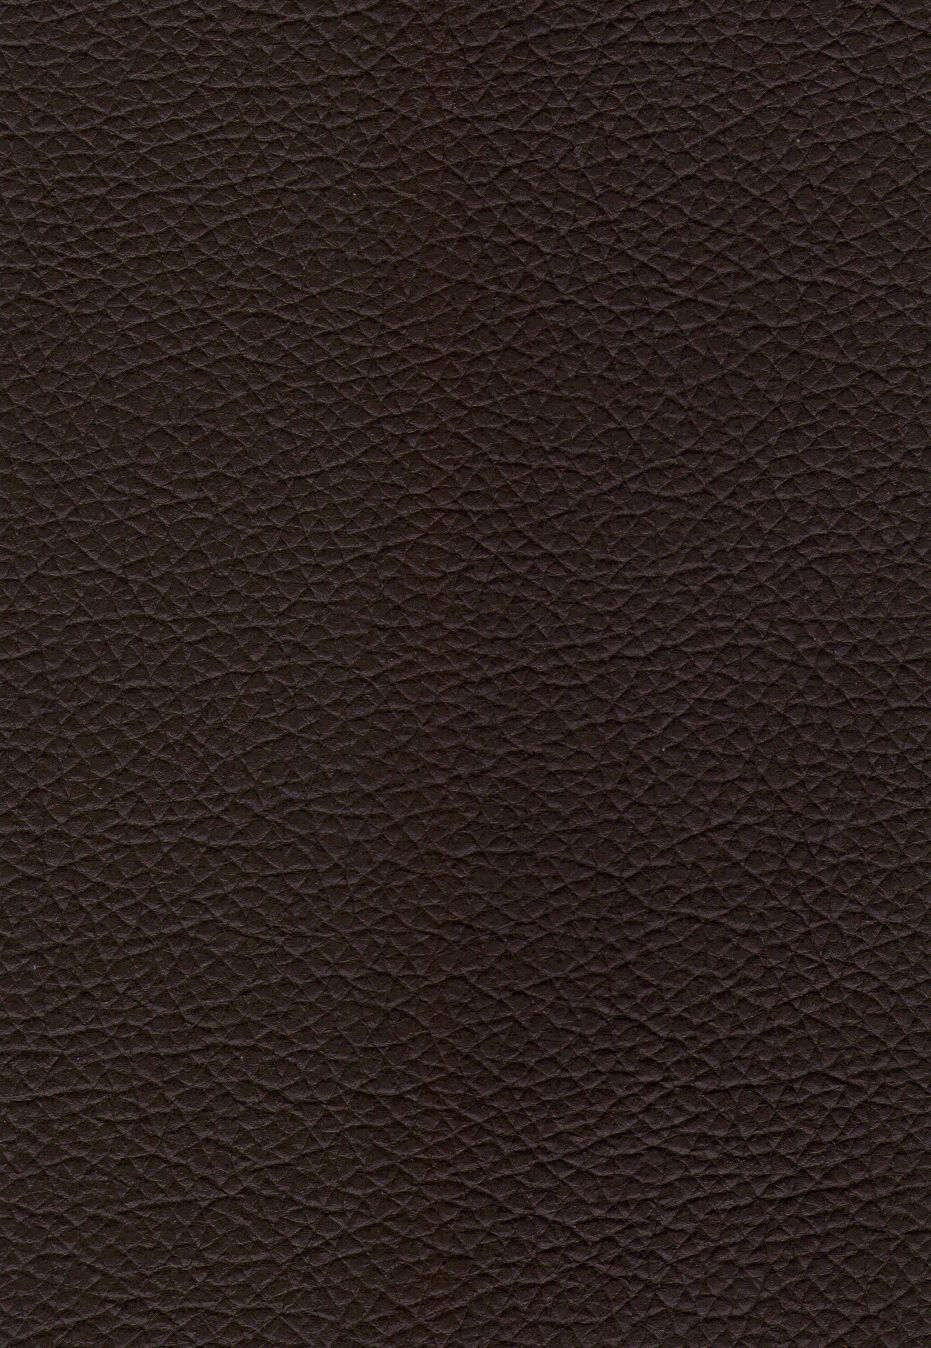 Leatherette Brown